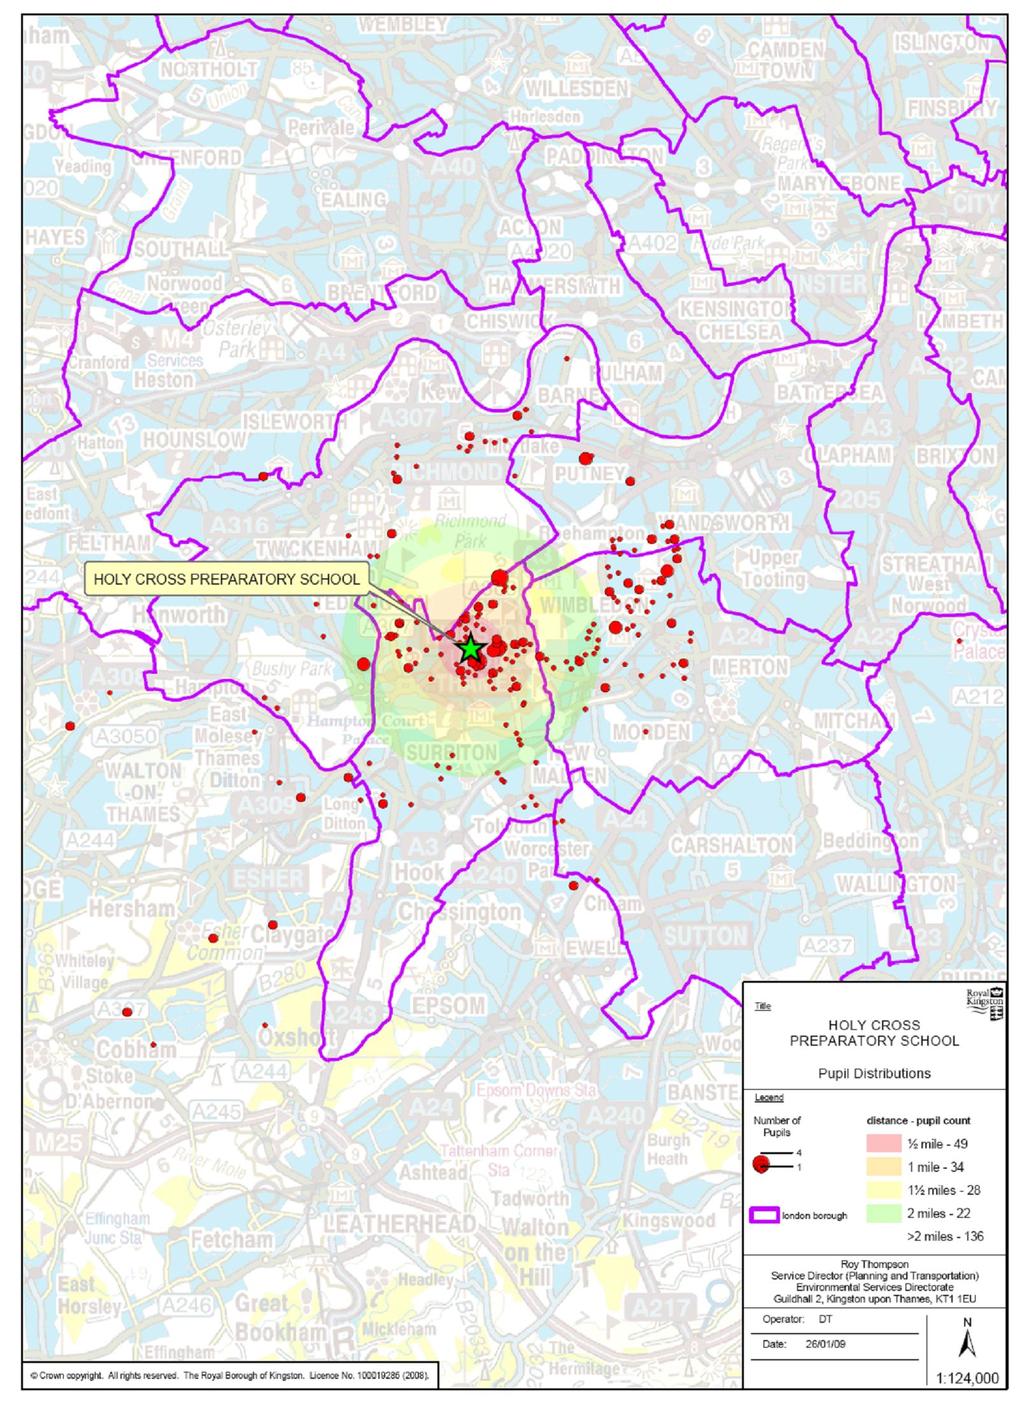 CATCHMENT AREA Analysis of catchment area: More than half of the pupils, 136 (51%) live further than 2 miles away from the school, which means it is too far to cycle or walk to school.